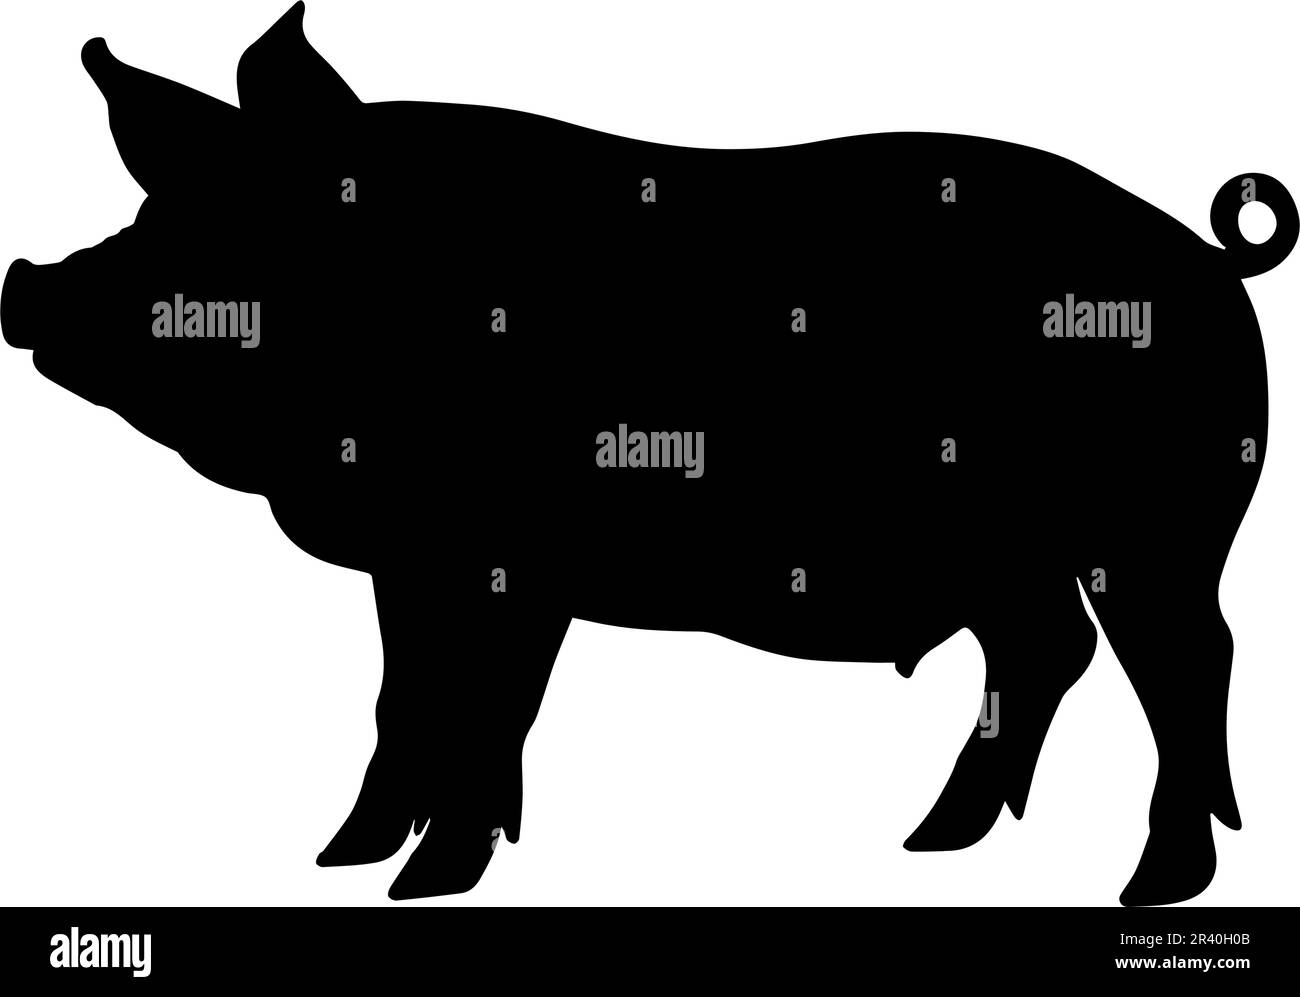 Pig silhouette isolated on white background. vector illustration Stock Vector